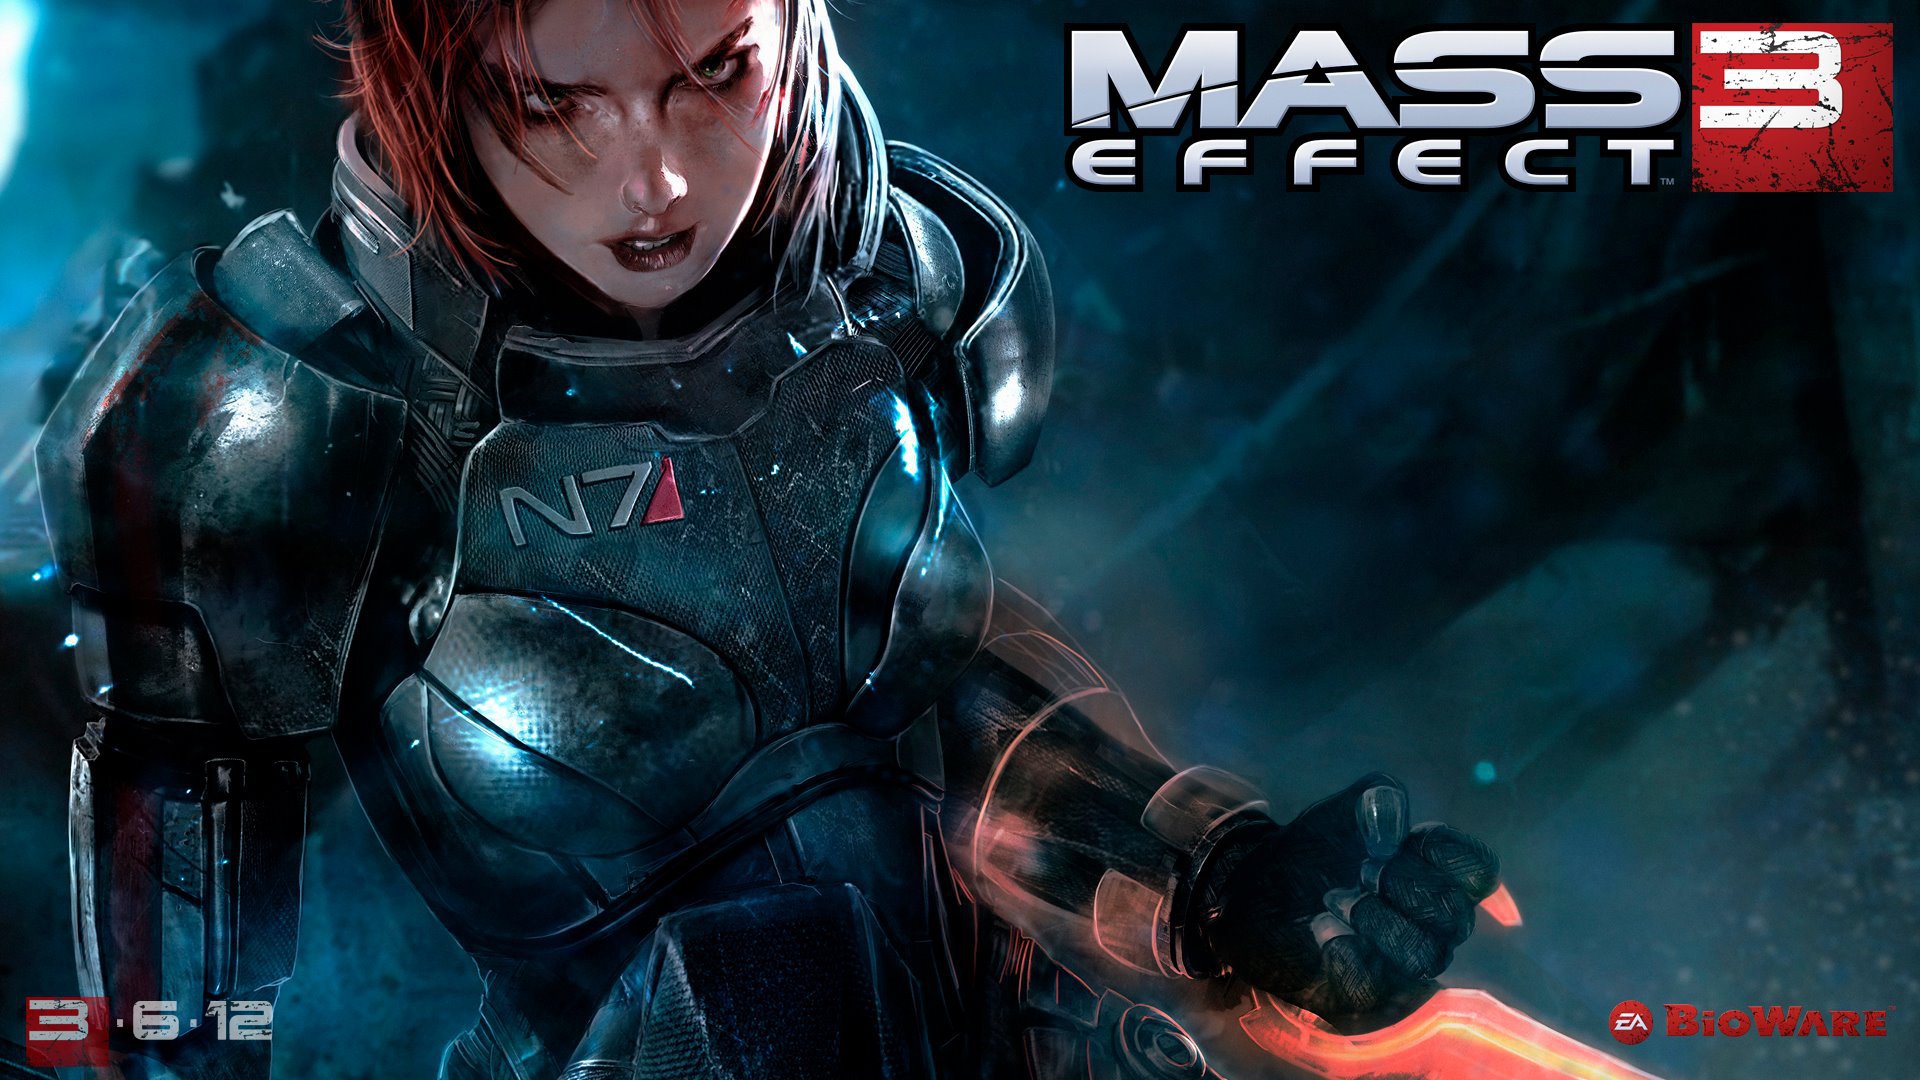 Opinion: How to Fix “Mass Effect 3” - The Infamous Red, Blue, and Green Endings